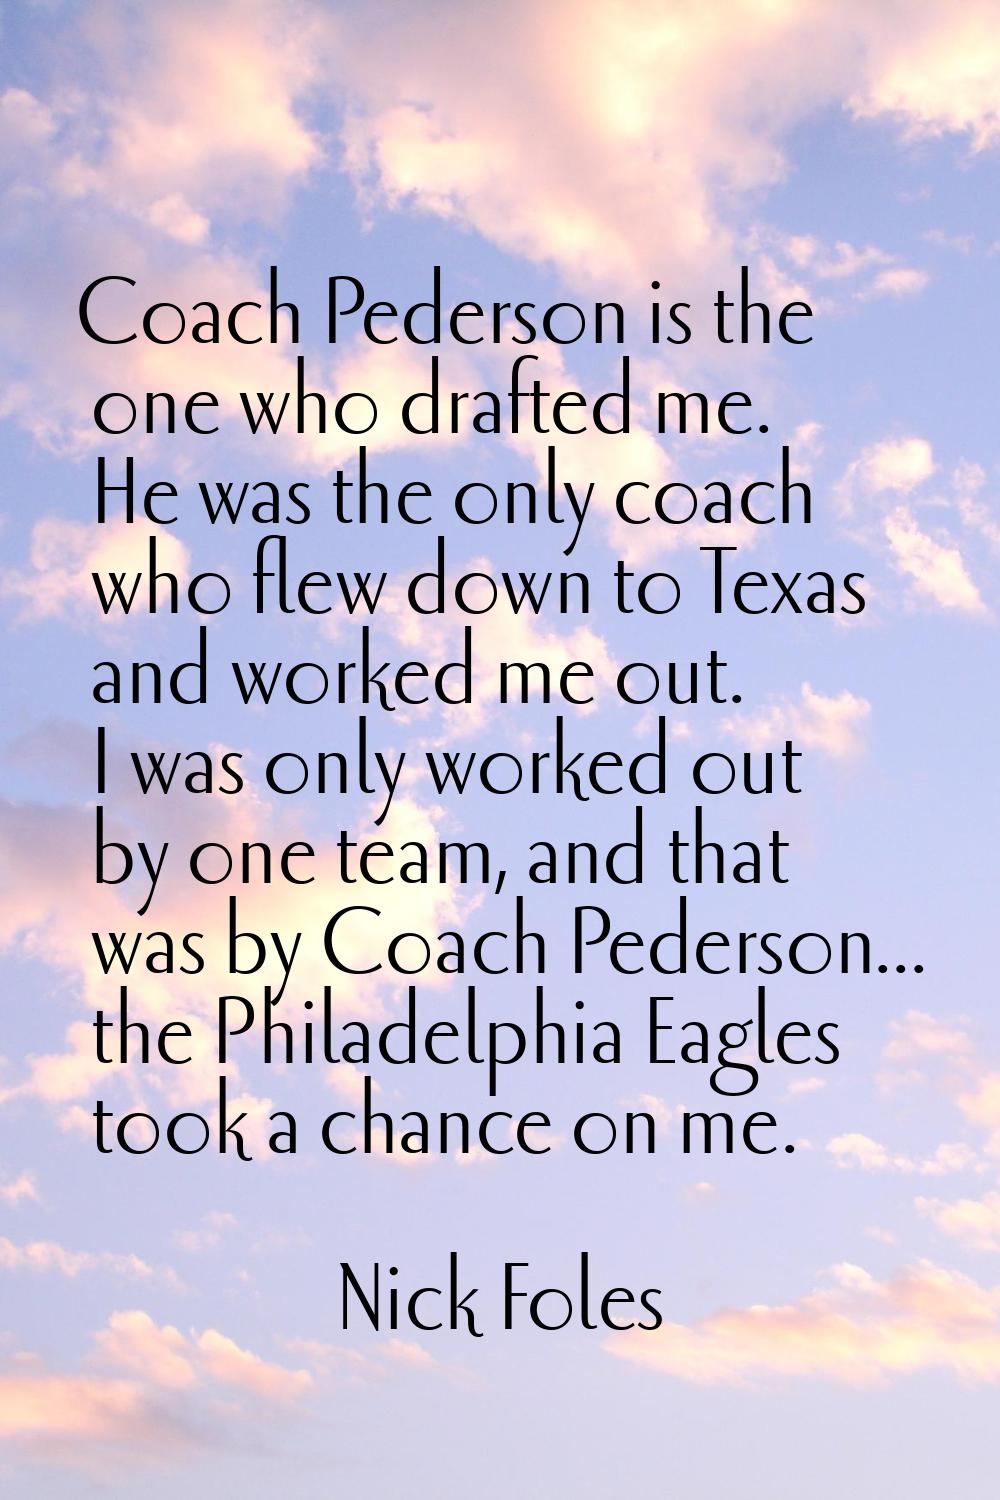 Coach Pederson is the one who drafted me. He was the only coach who flew down to Texas and worked m